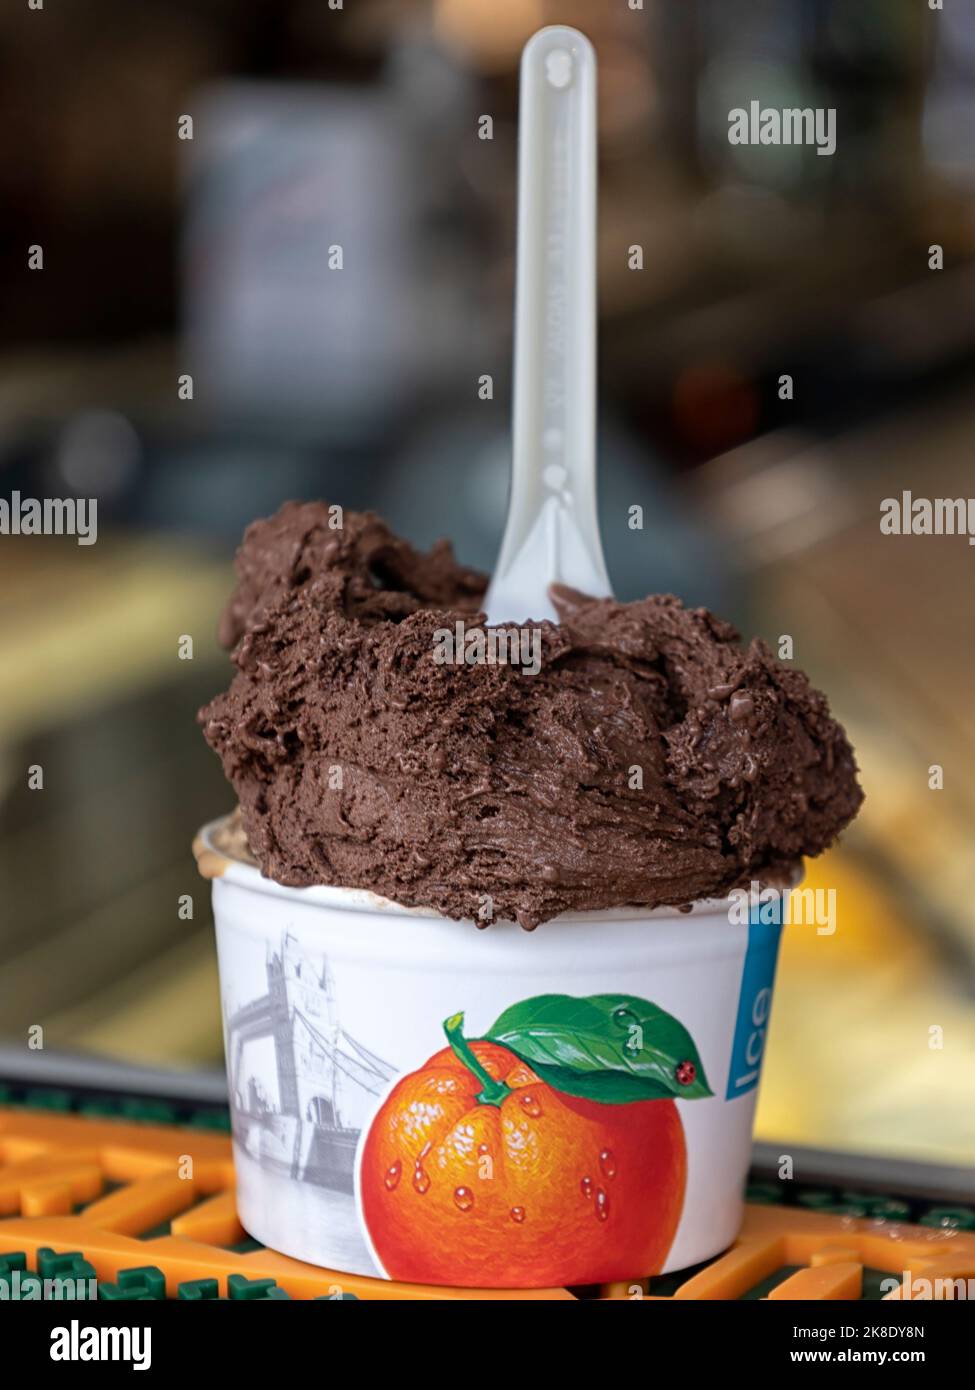 https://c8.alamy.com/comp/2K8DY8N/polignano-a-mare-italy-october-13-2022-chocolate-flavoured-ice-cream-in-a-tub-on-the-counter-of-a-cafe-selling-gelato-2K8DY8N.jpg